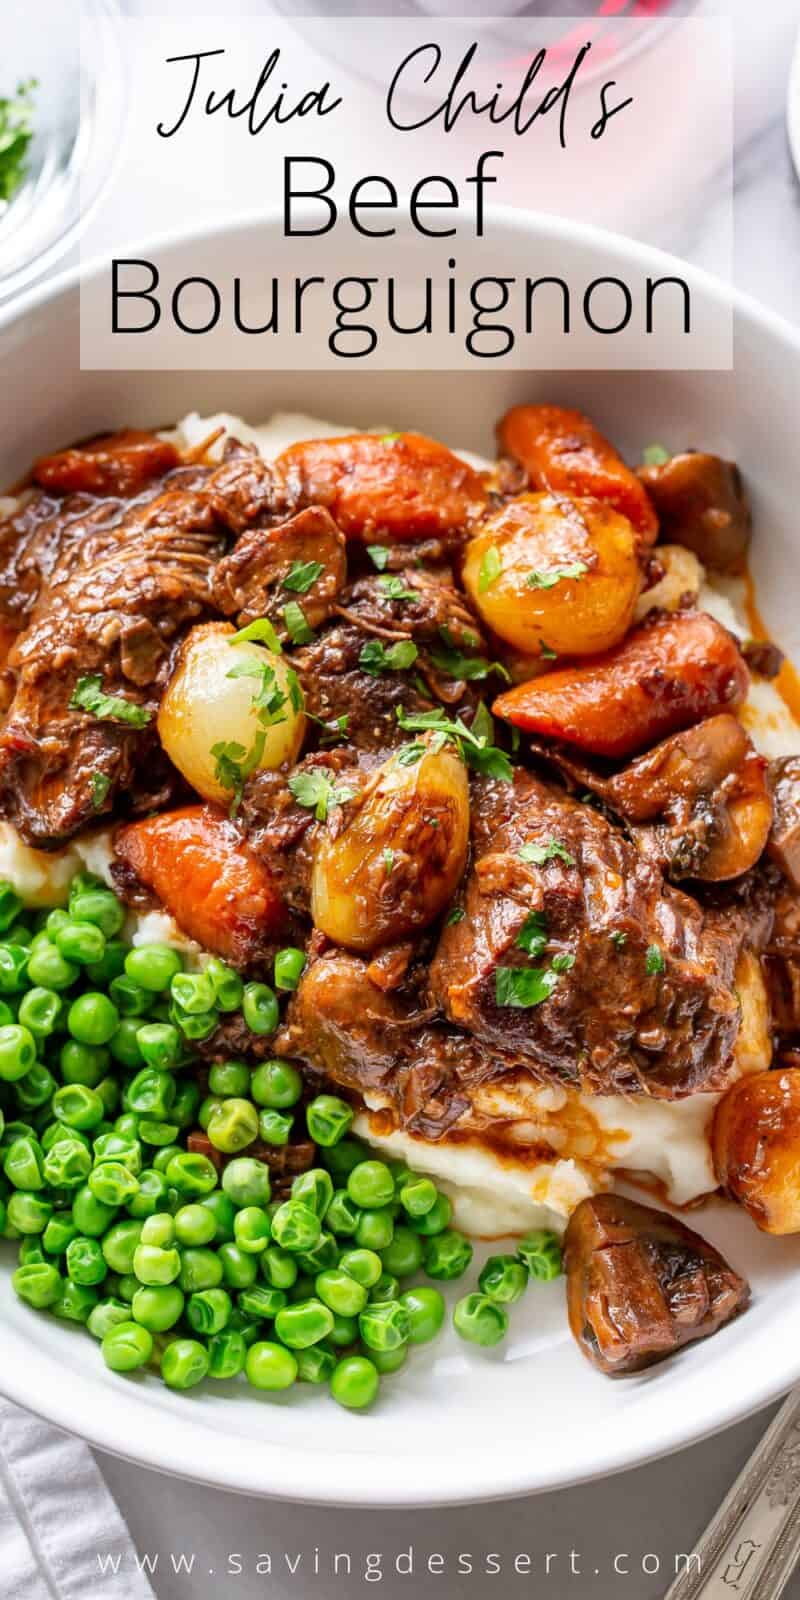 Julia Child's Beef Bourguignon served in a bowl over mashed potatoes and served with peas